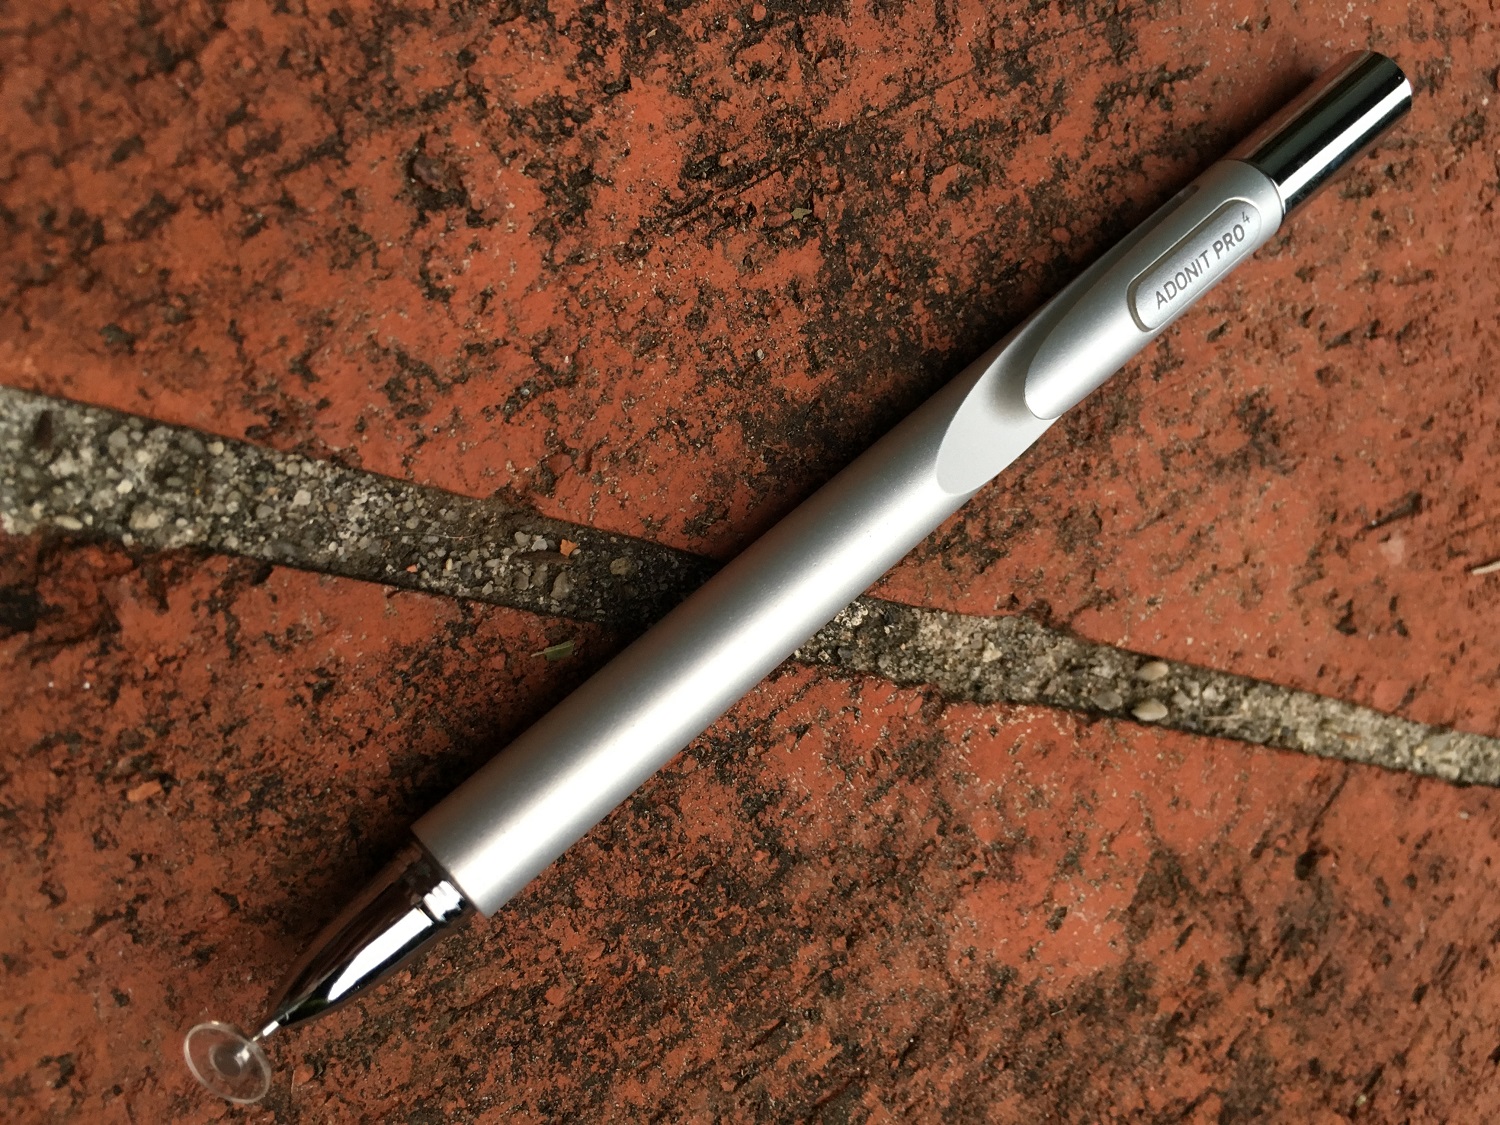 Adonit Pro 4 Impressions: A Basic But Affordable Stylus | Digital Trends